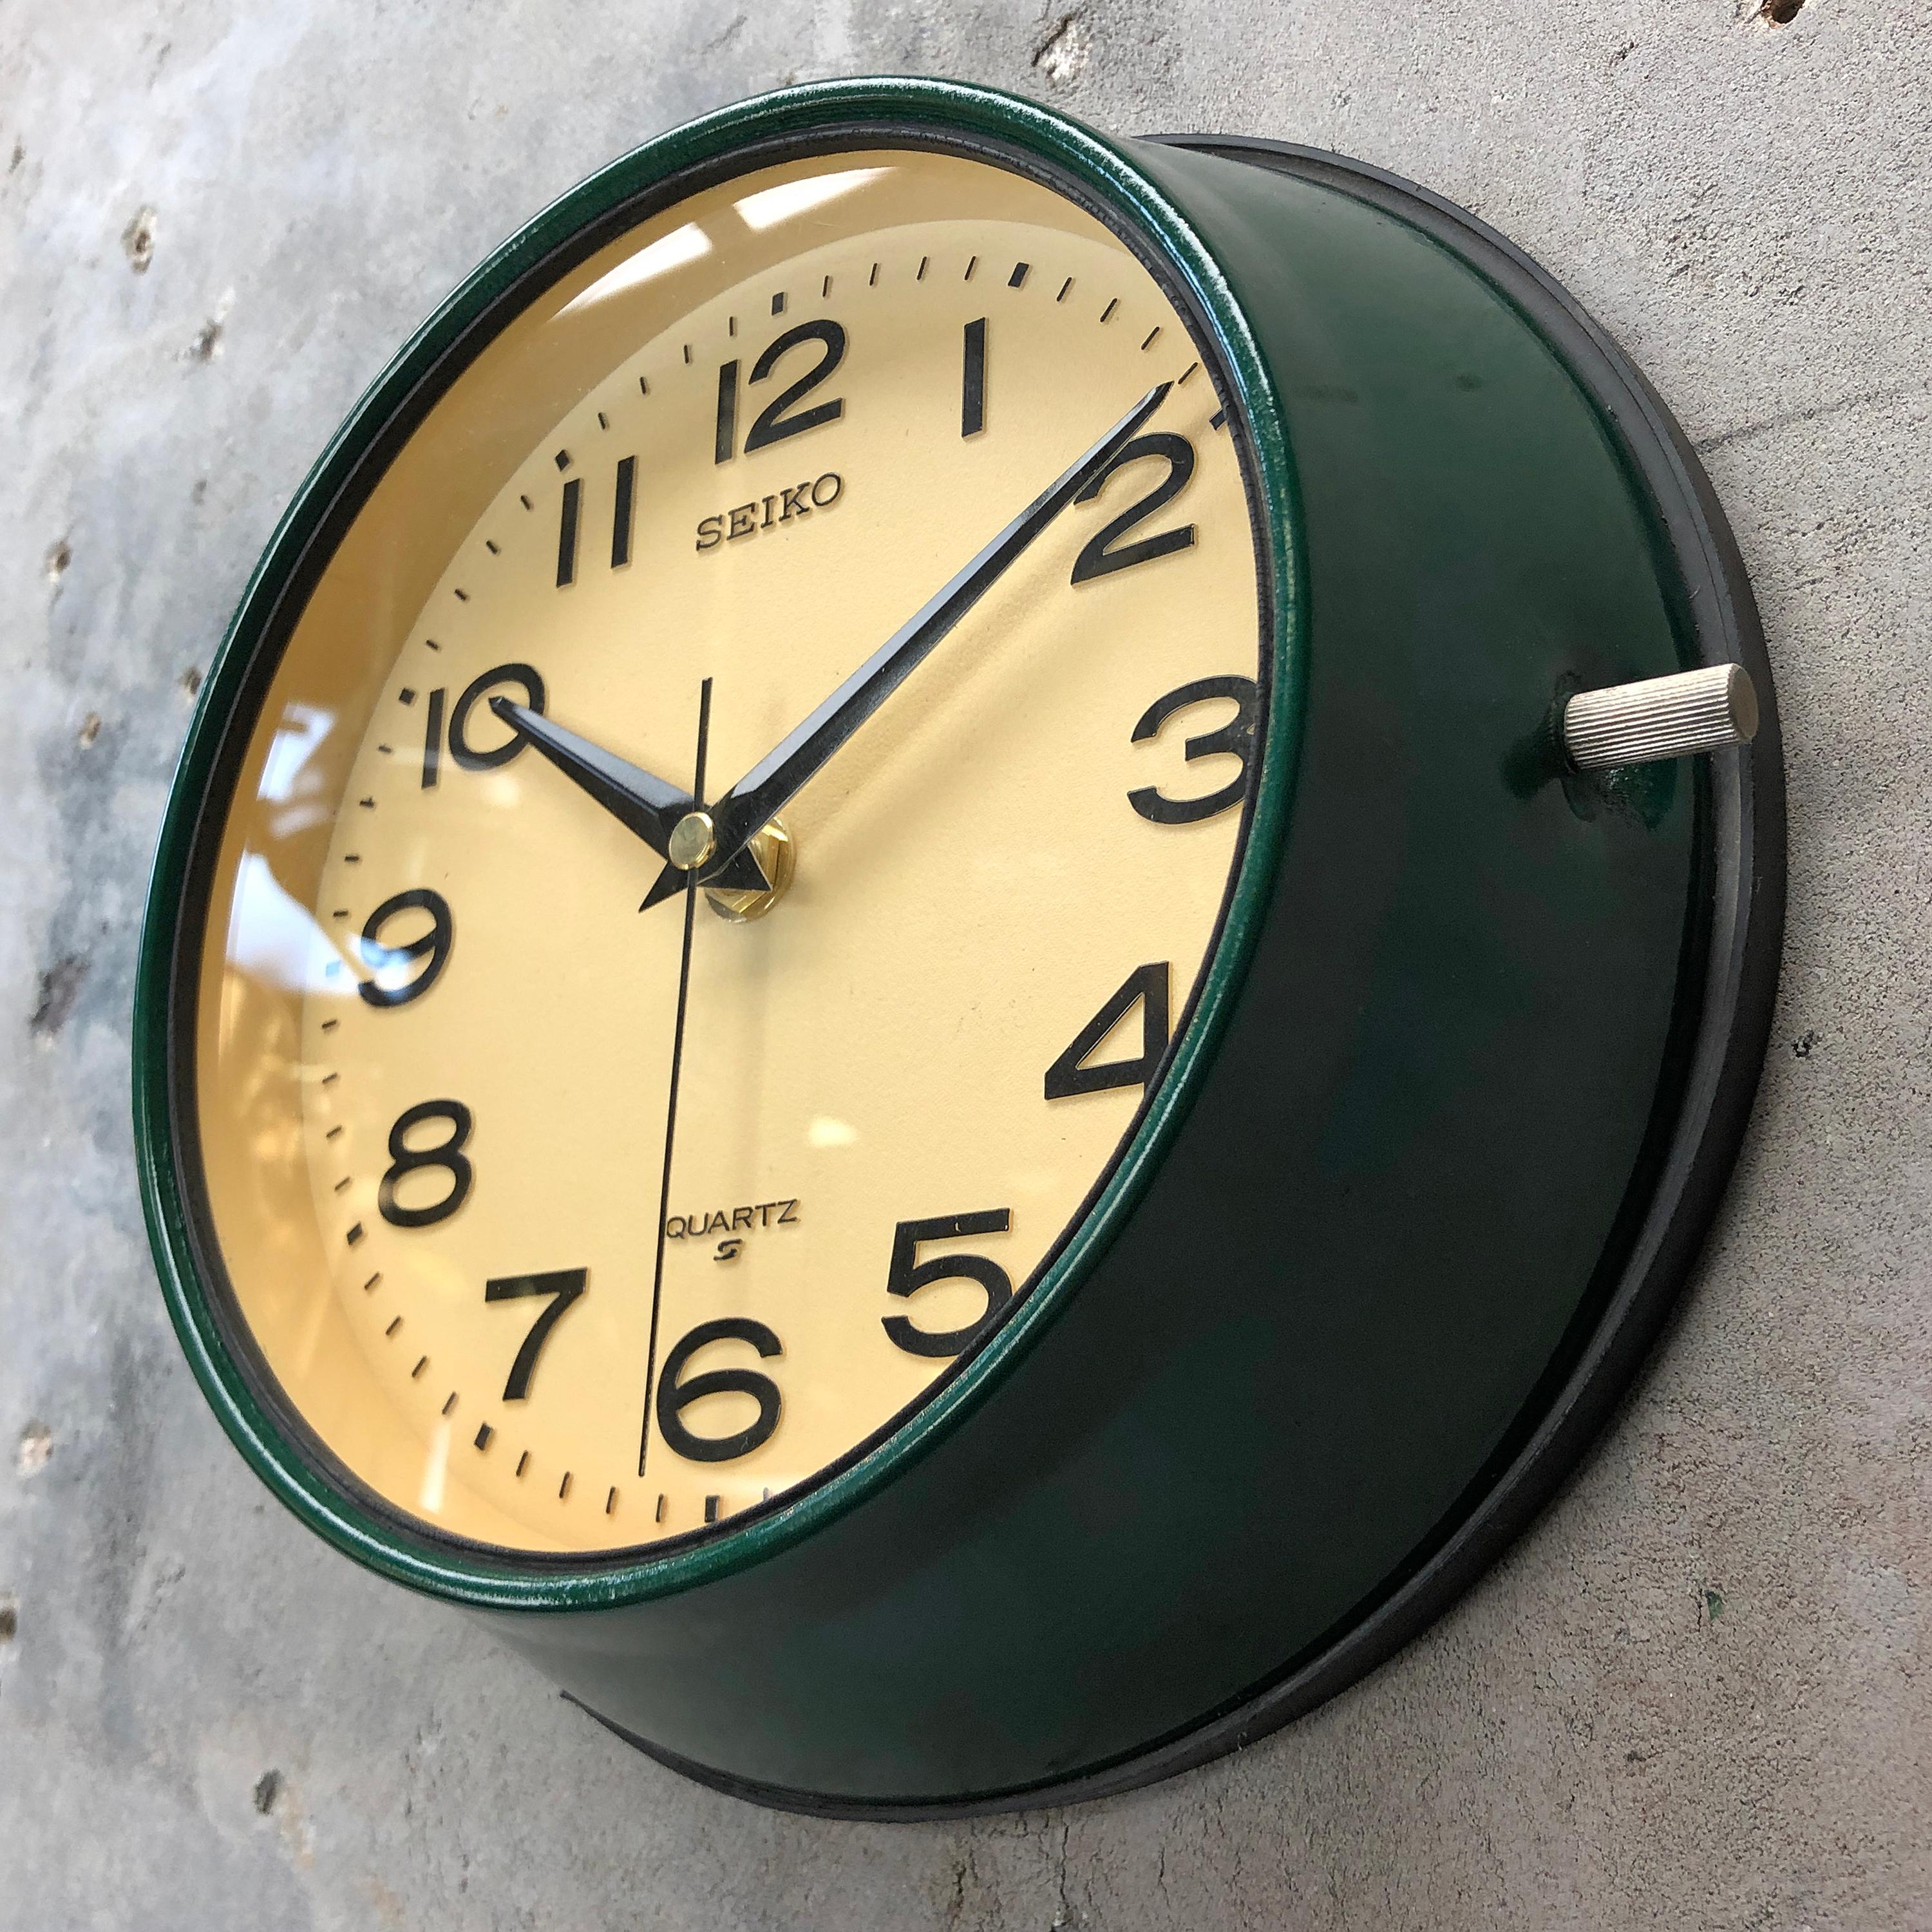 Seiko supertanker radio room clock with dark green finish.

A reclaimed and restored maritime slave clock.

These clocks were used in great numbers on super tankers, cargo ships and military vessels built during the 1970s and housed a movement